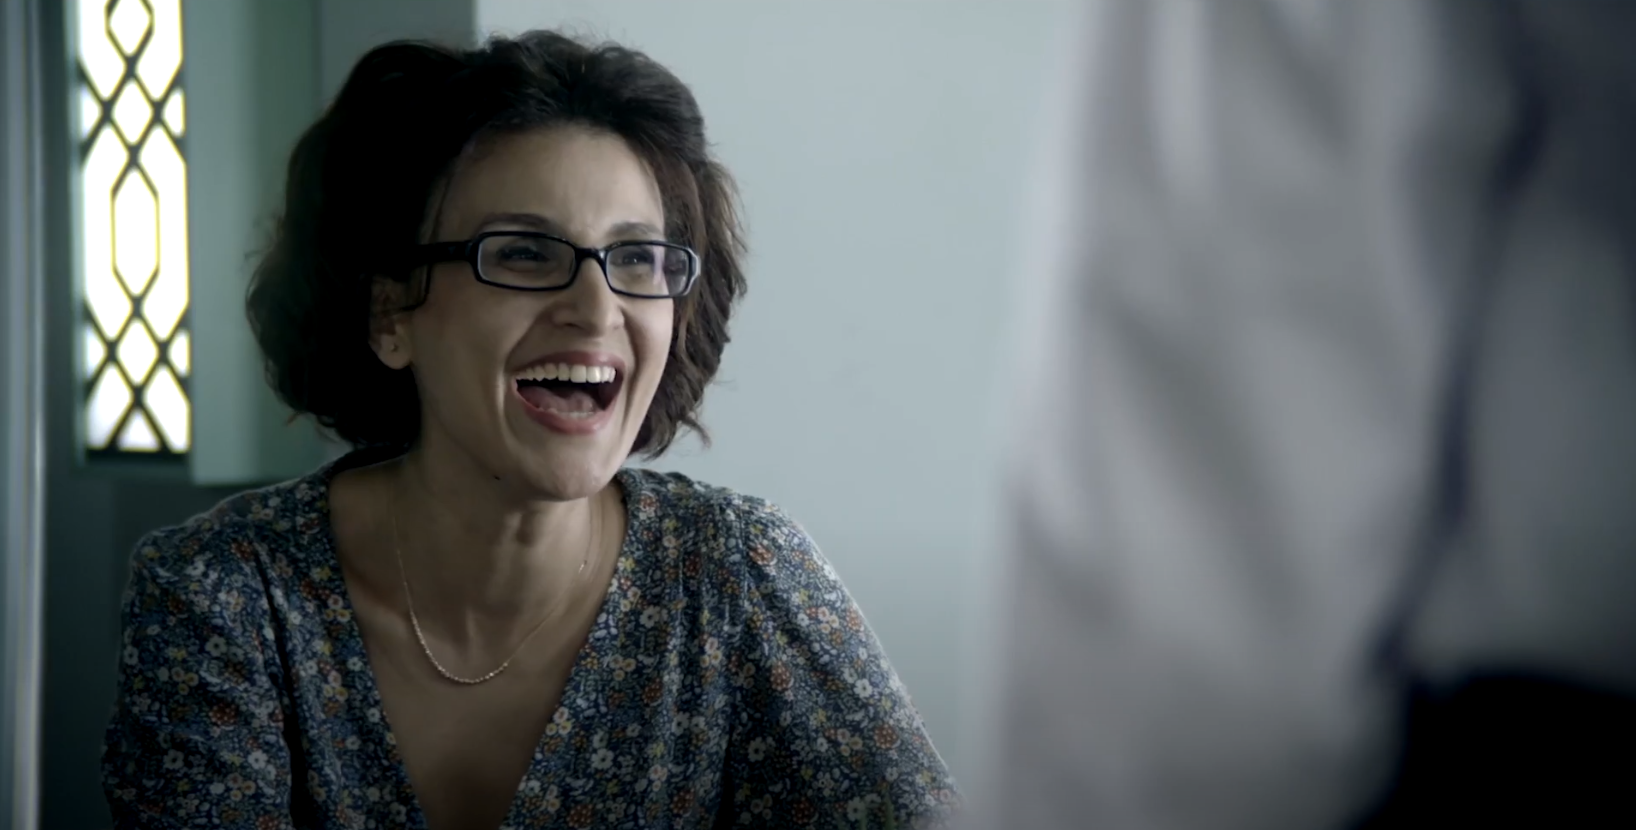 woman with glasses smiling and laughing